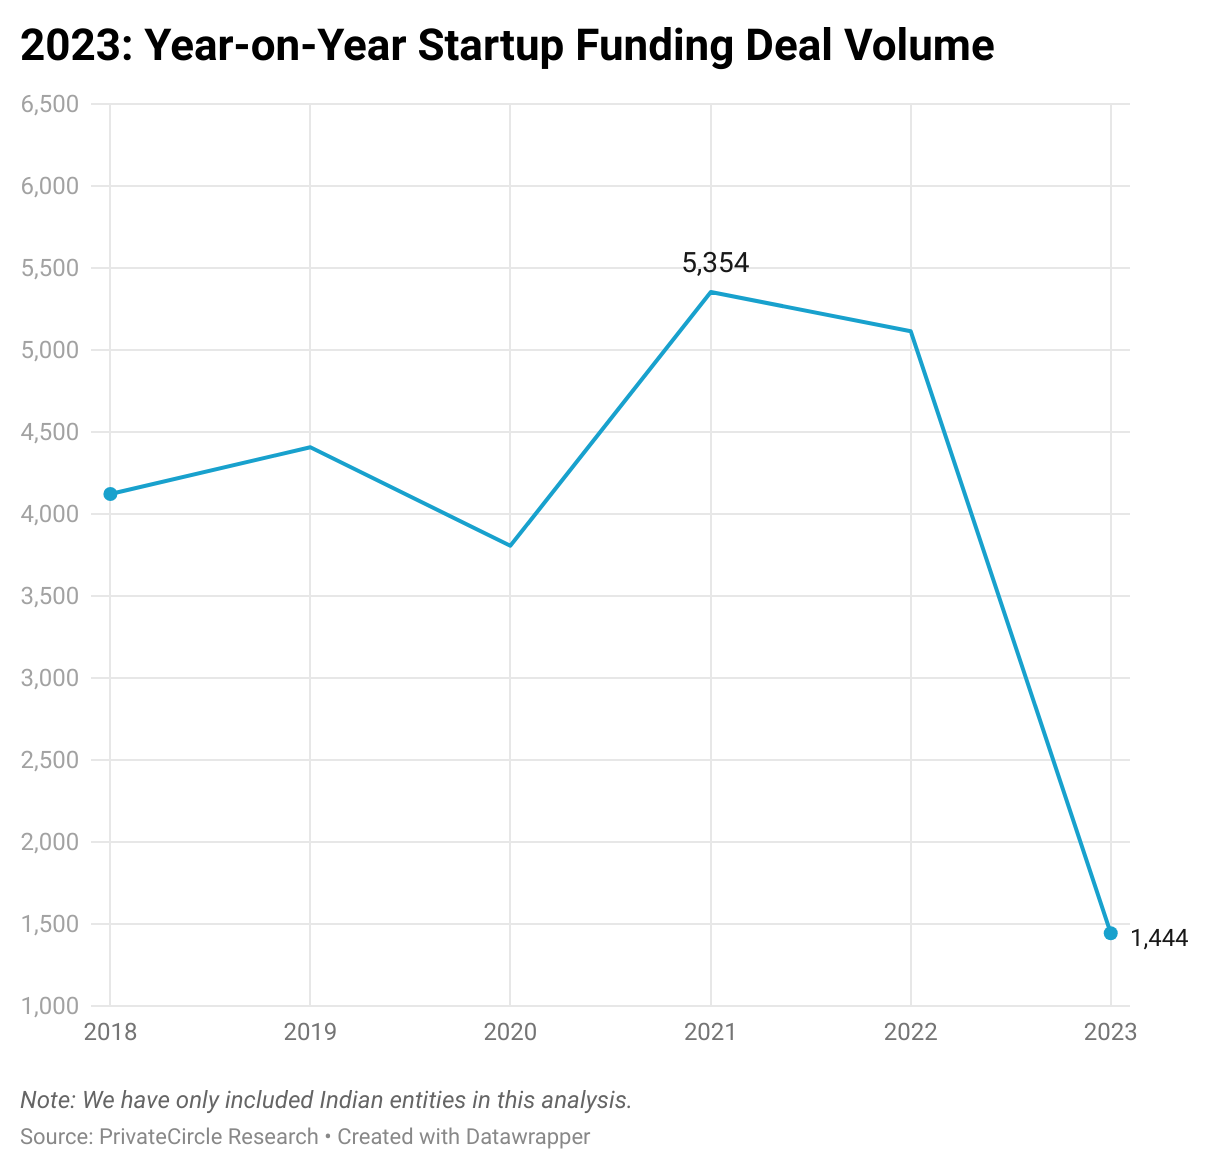 2023: Year-on-Year Startup Funding Deal Volume.

In 2023, PrivateCircle recorded 1,444 primary funding deals in Indian startups as compared to 5354 deals recorded in 2021, when the fundraising activity was at its peak. The deal volume in 2023 is even lower than it was in 2018.